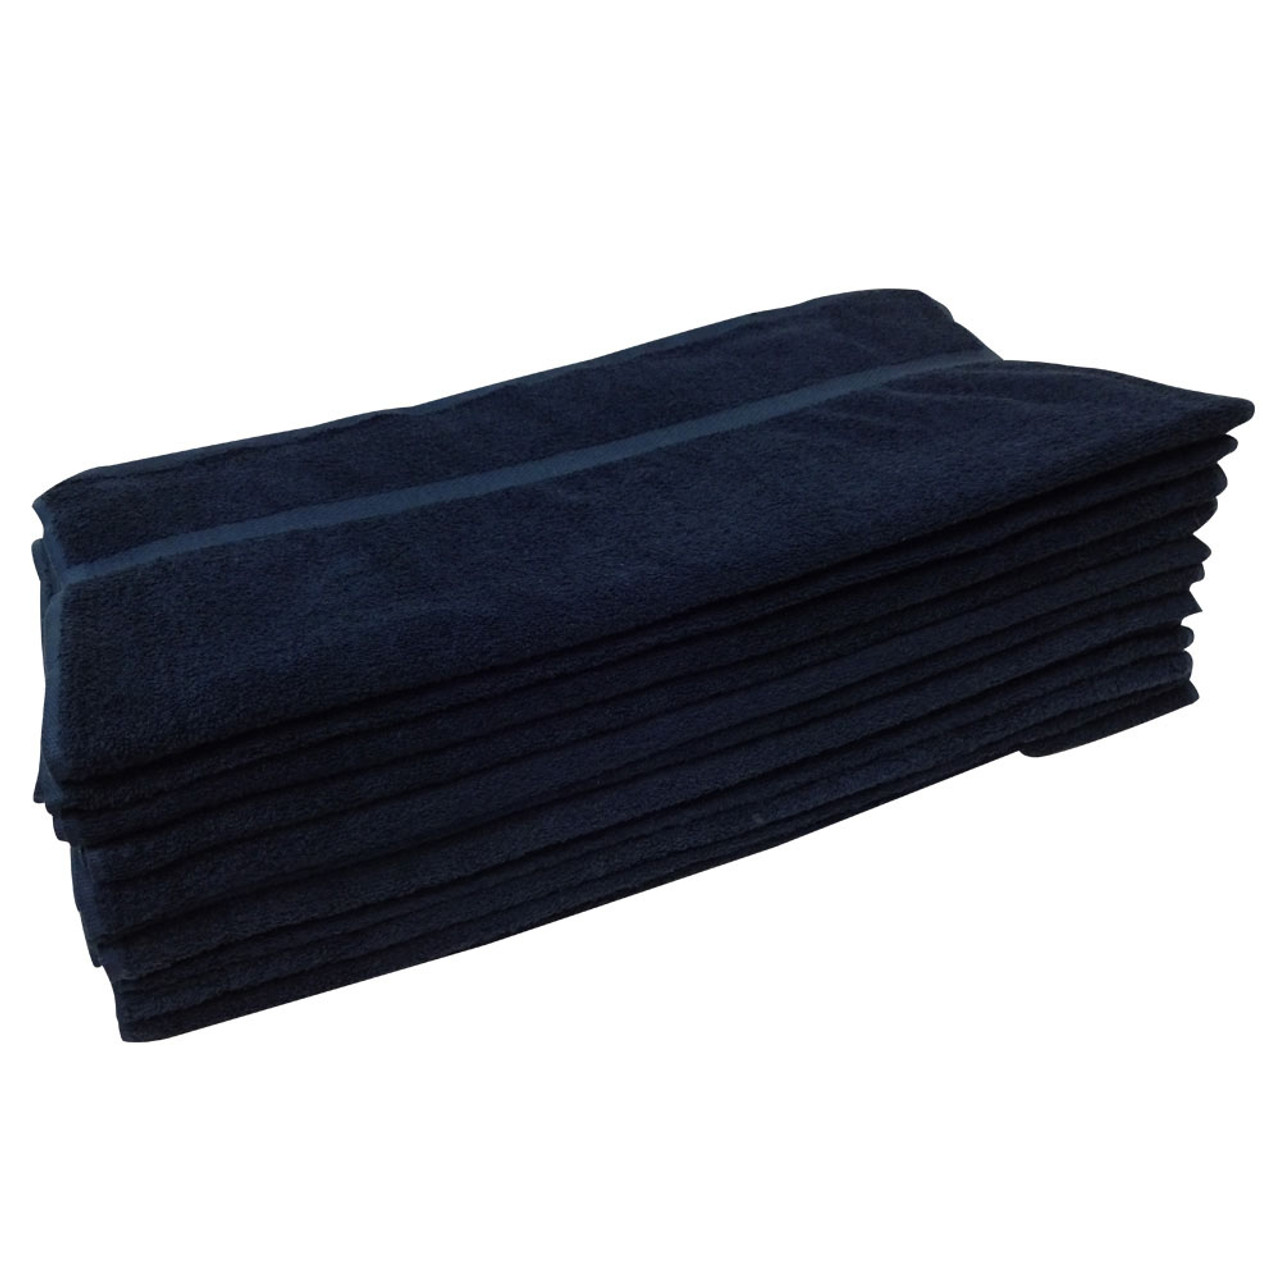 Excellent Deals Kitchen Terry Towels [12 Pack, Black & White]-100% Cotton  Dish Towels 15x25 -Dish Cloth, Tea Towels, Cleaning Towels and Bar Towels.